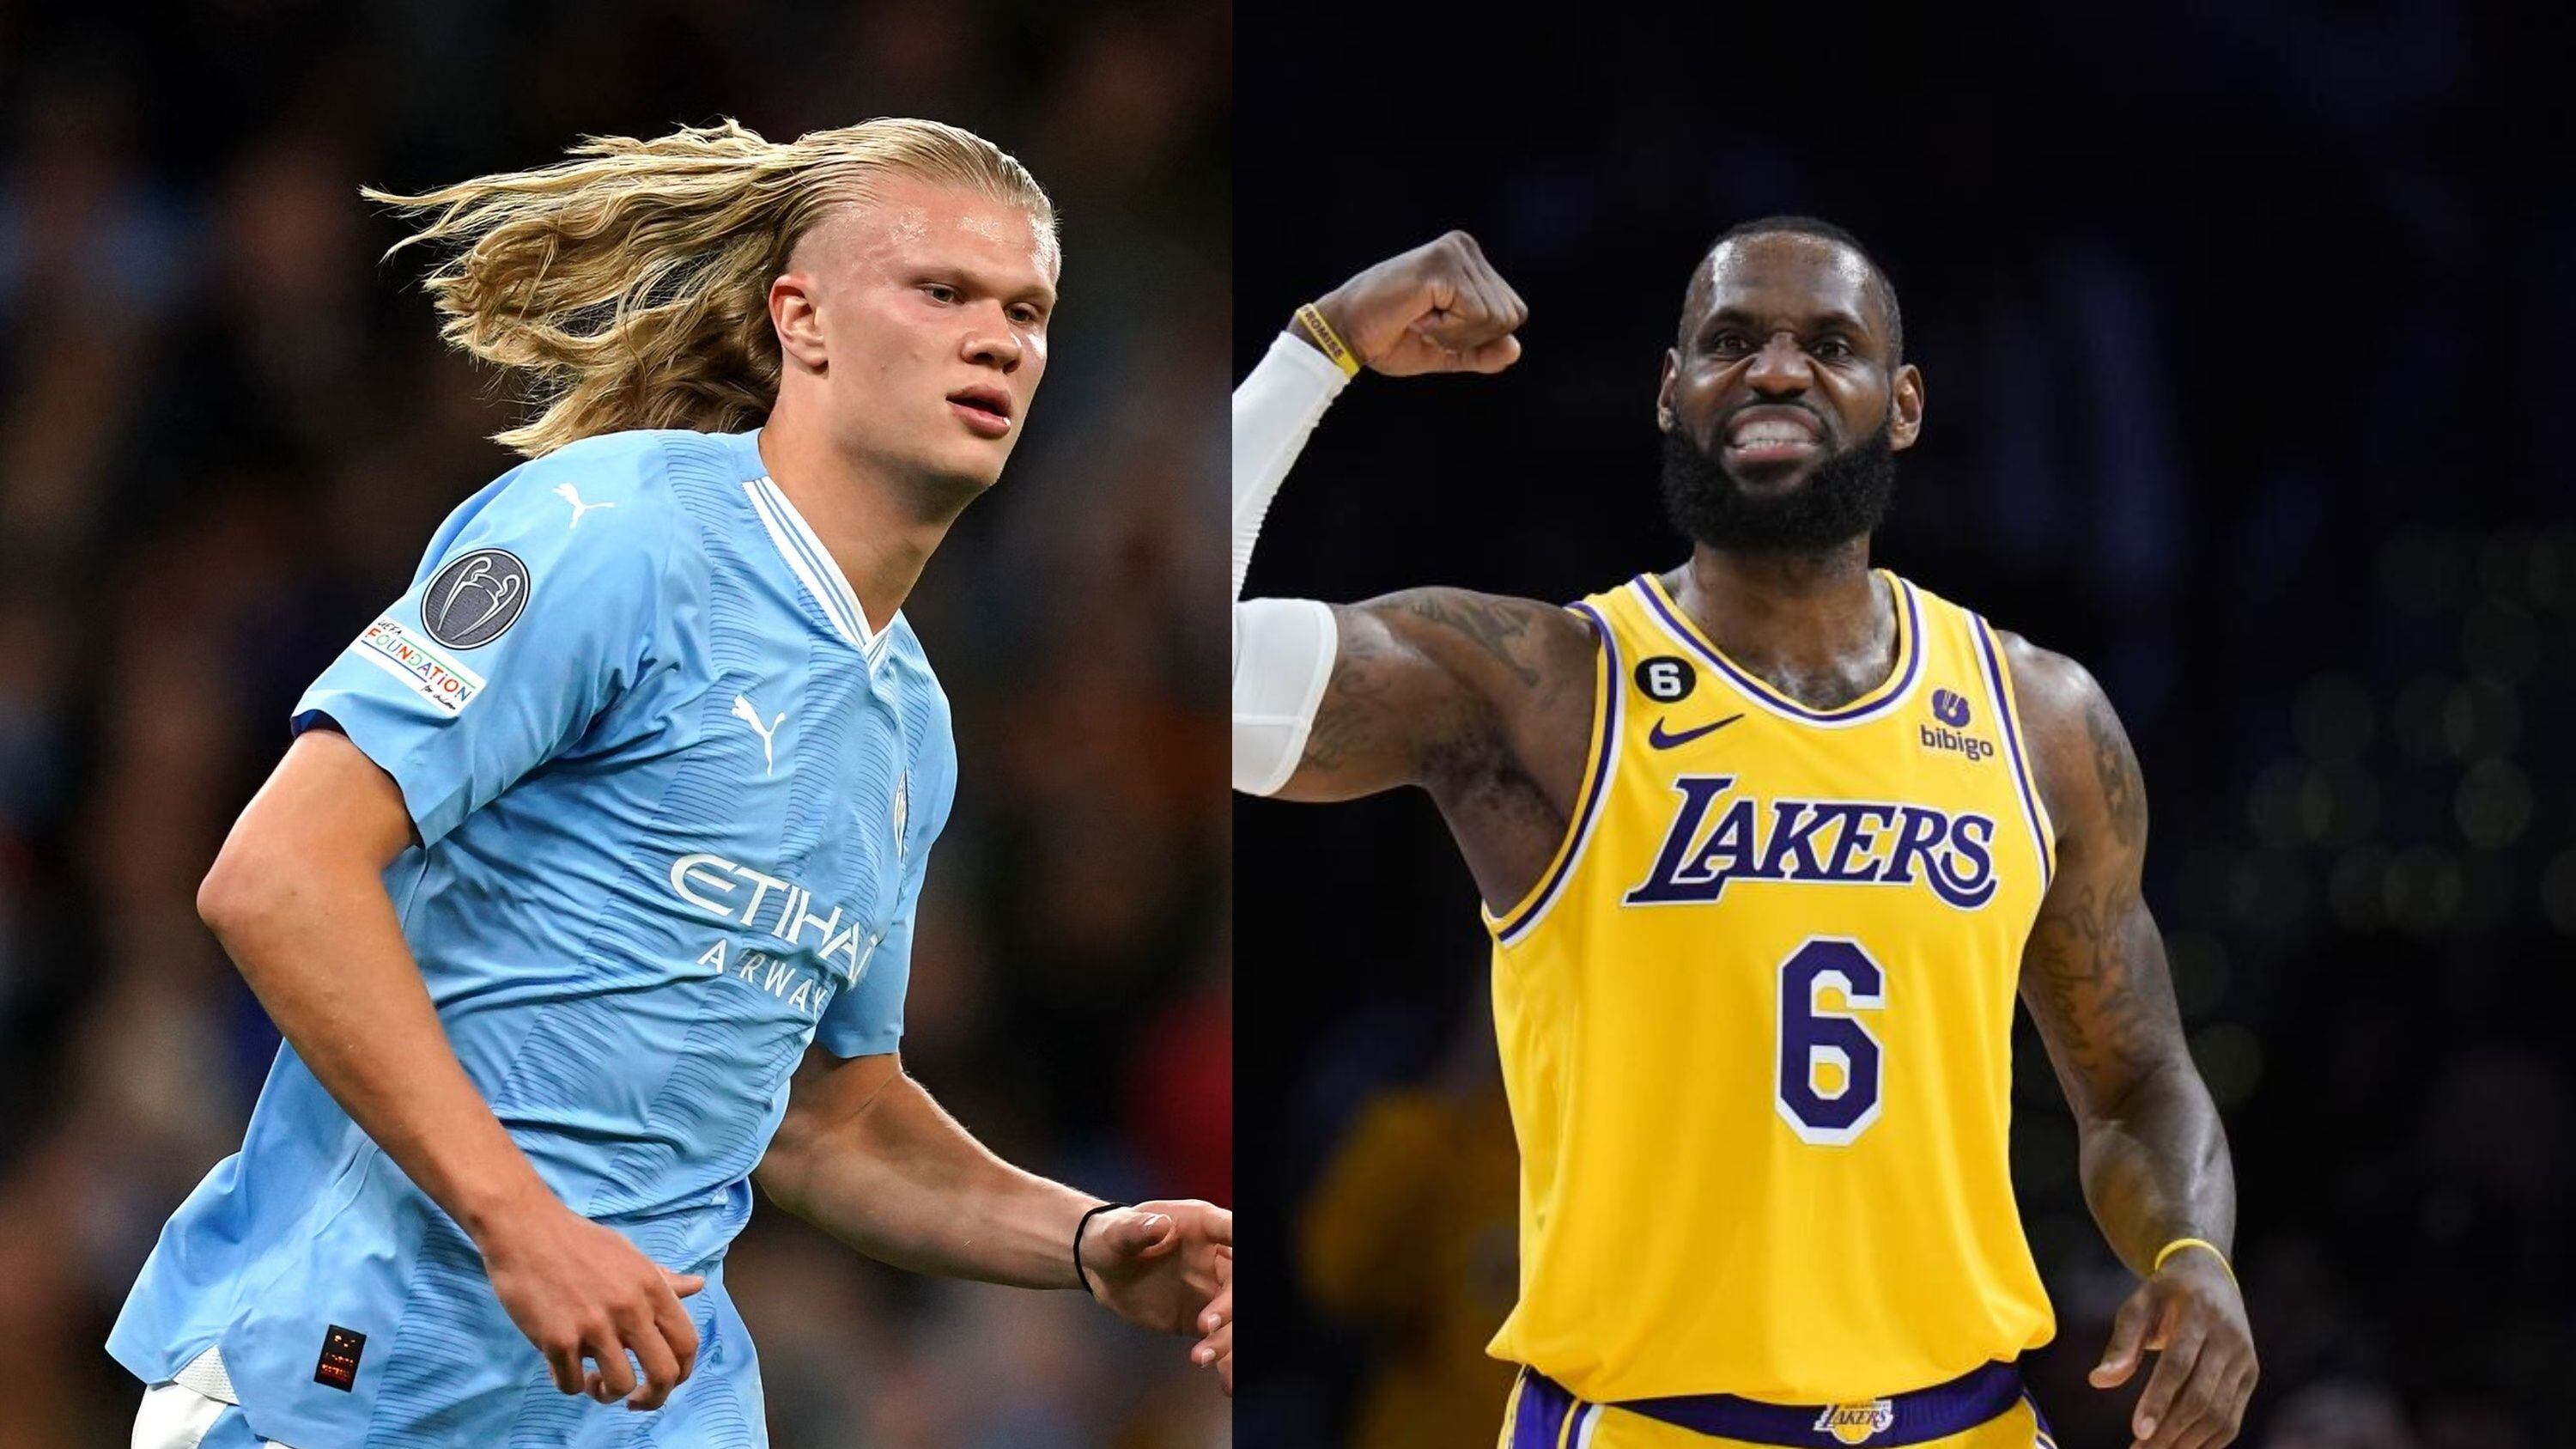 (VIDEO) LeBron James and Erling Haaland in an epic commercial that goes viral on social media